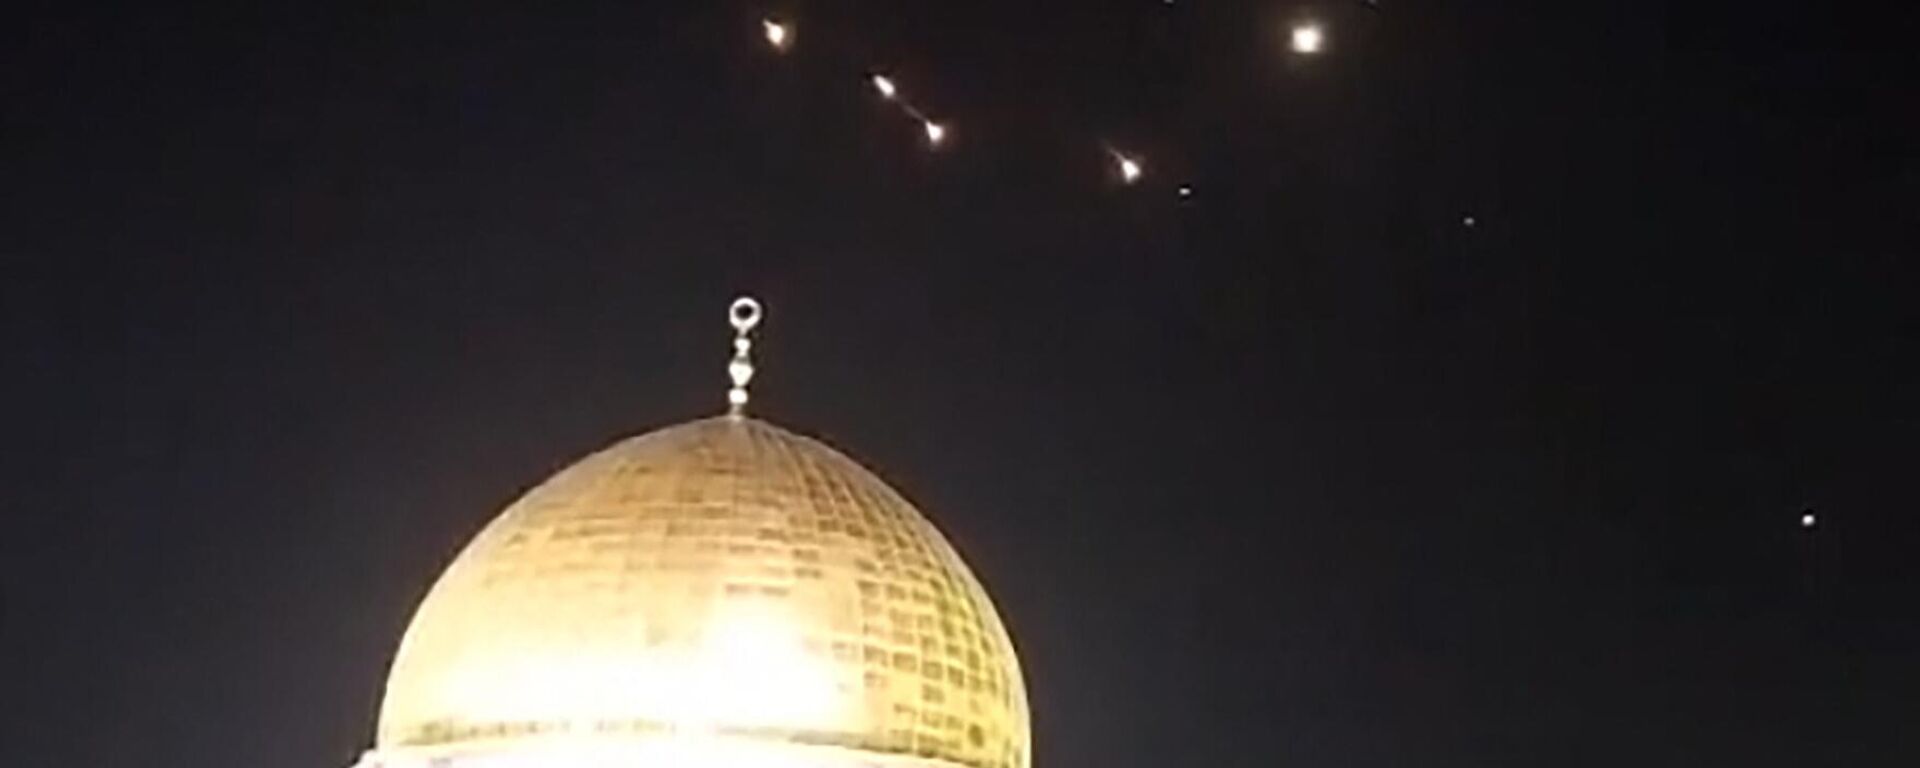 An image-grab from a video taken early on April 14, 2024, shows rocket trails in the sky above the Al-Aqsa Mosque compound in Jerusalem. Iran launched its first-ever direct attack on Israeli territory late on April 13 in response to Israel's April 1 attack targeting the Iranian Embassy compound in Damascus, Syria. - Sputnik International, 1920, 14.04.2024